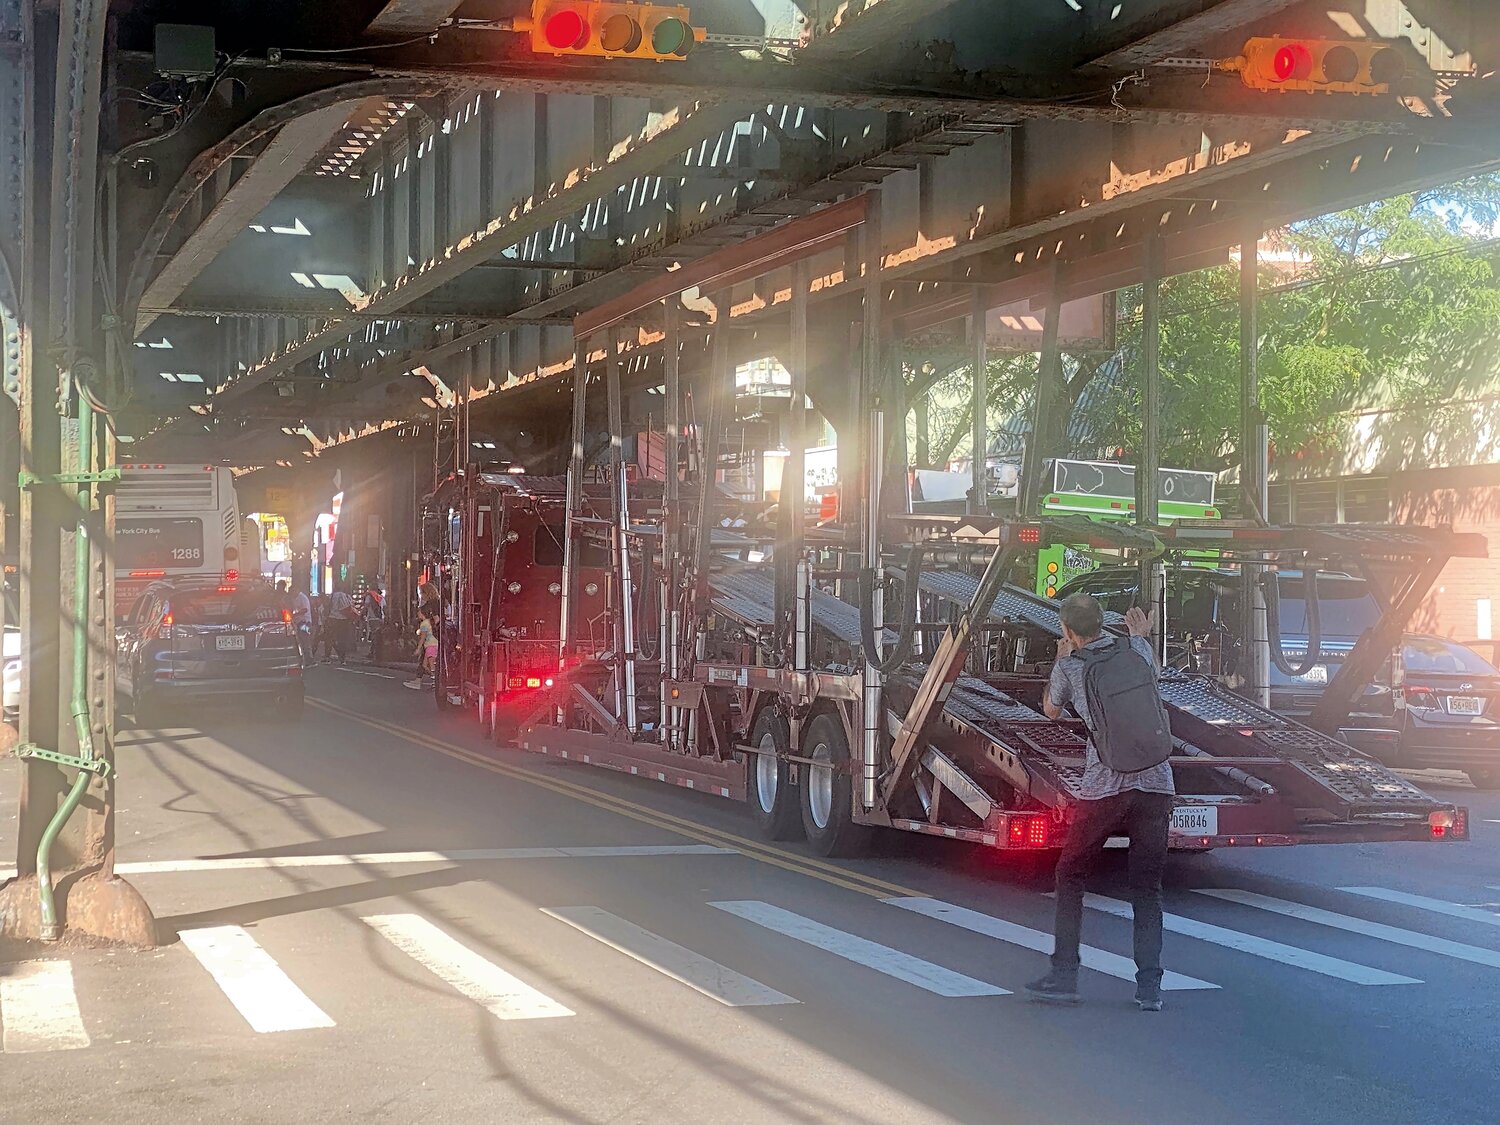 Yet another truck got stuck under the elevated subway tracks on Broadway in Kingsbridge last week.